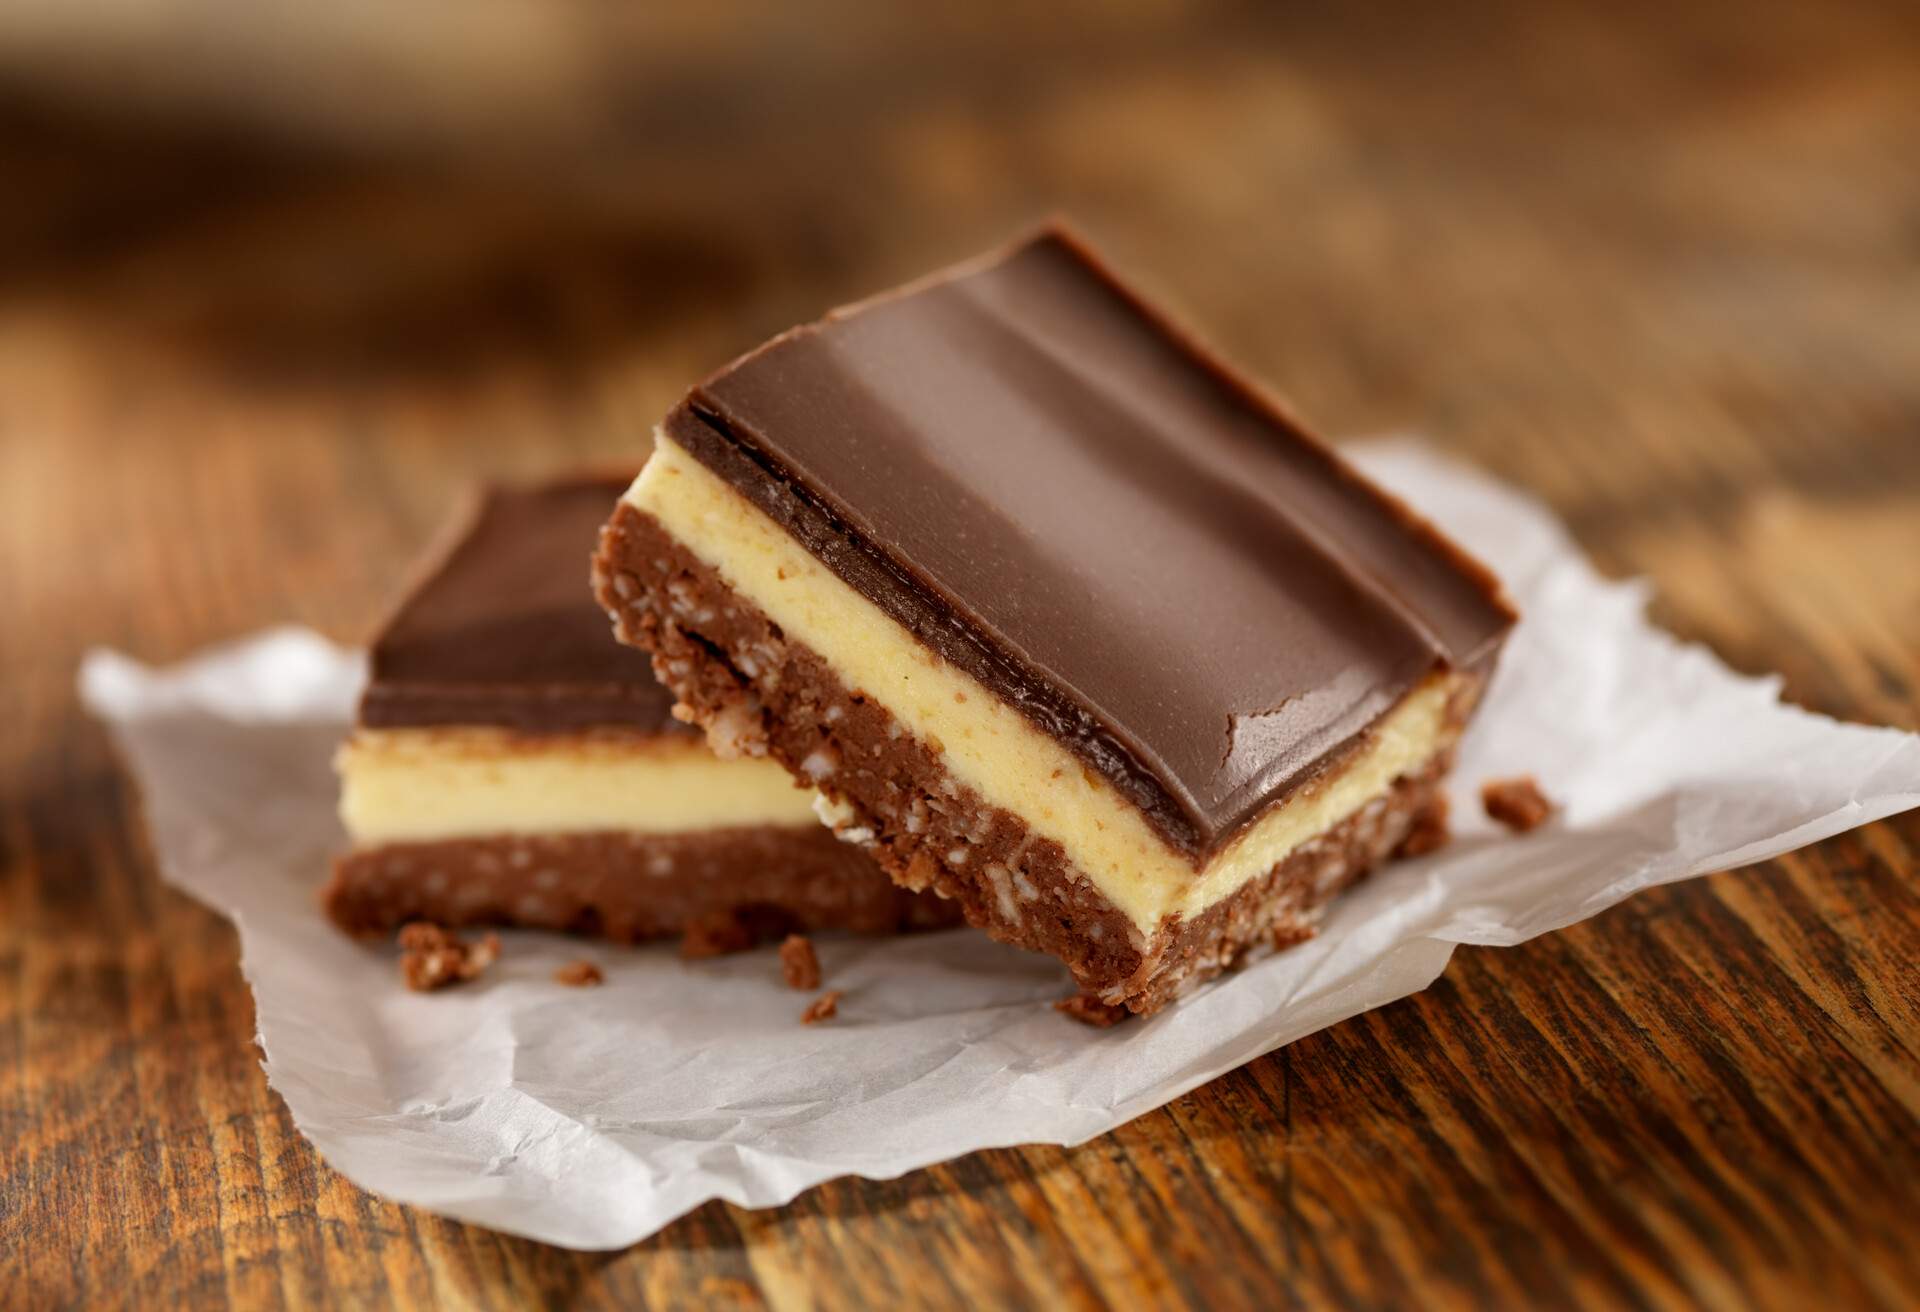 THEME_FOOD_CANADIAN_NANAIMO_BAR_GettyImages-154964022